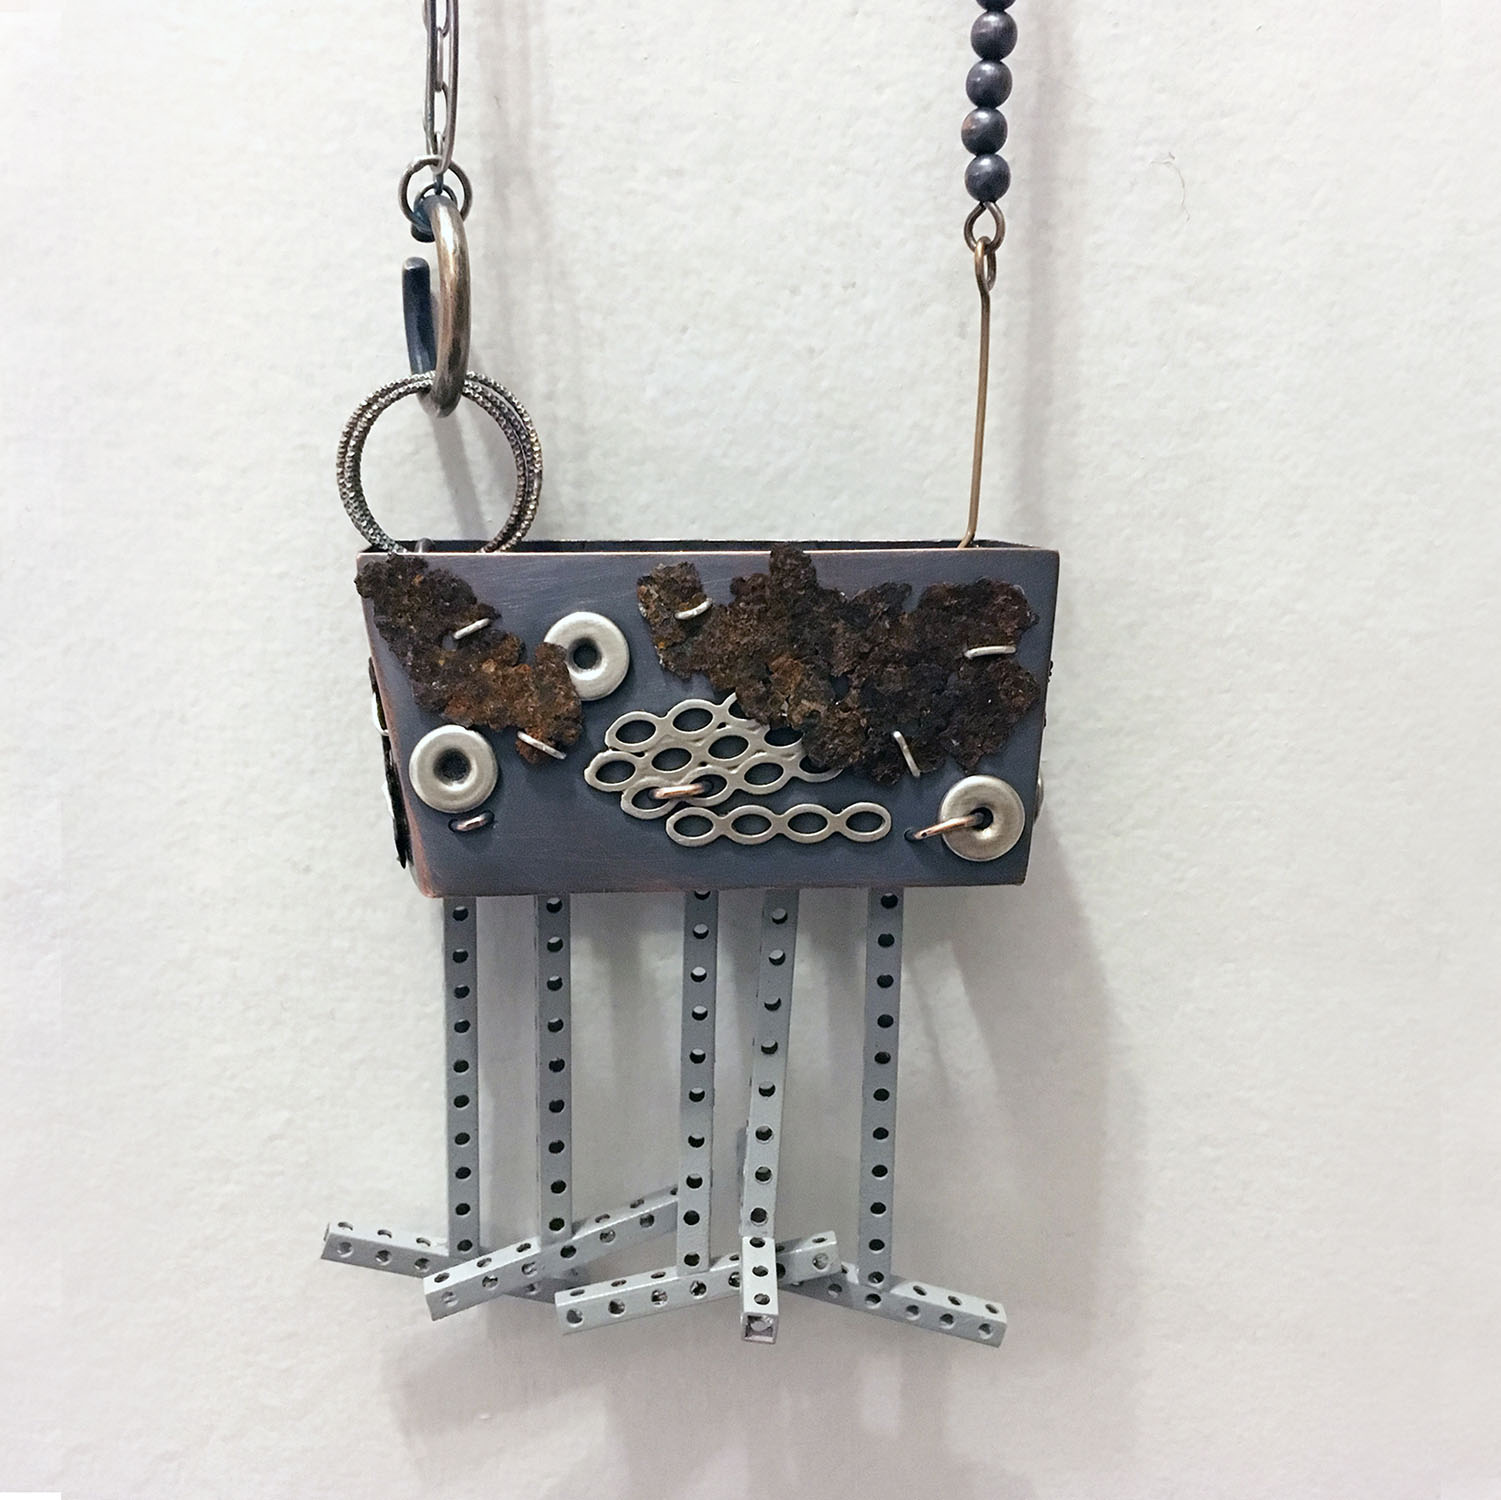 Natalie Macellaion - Construction Series - construction jewelry